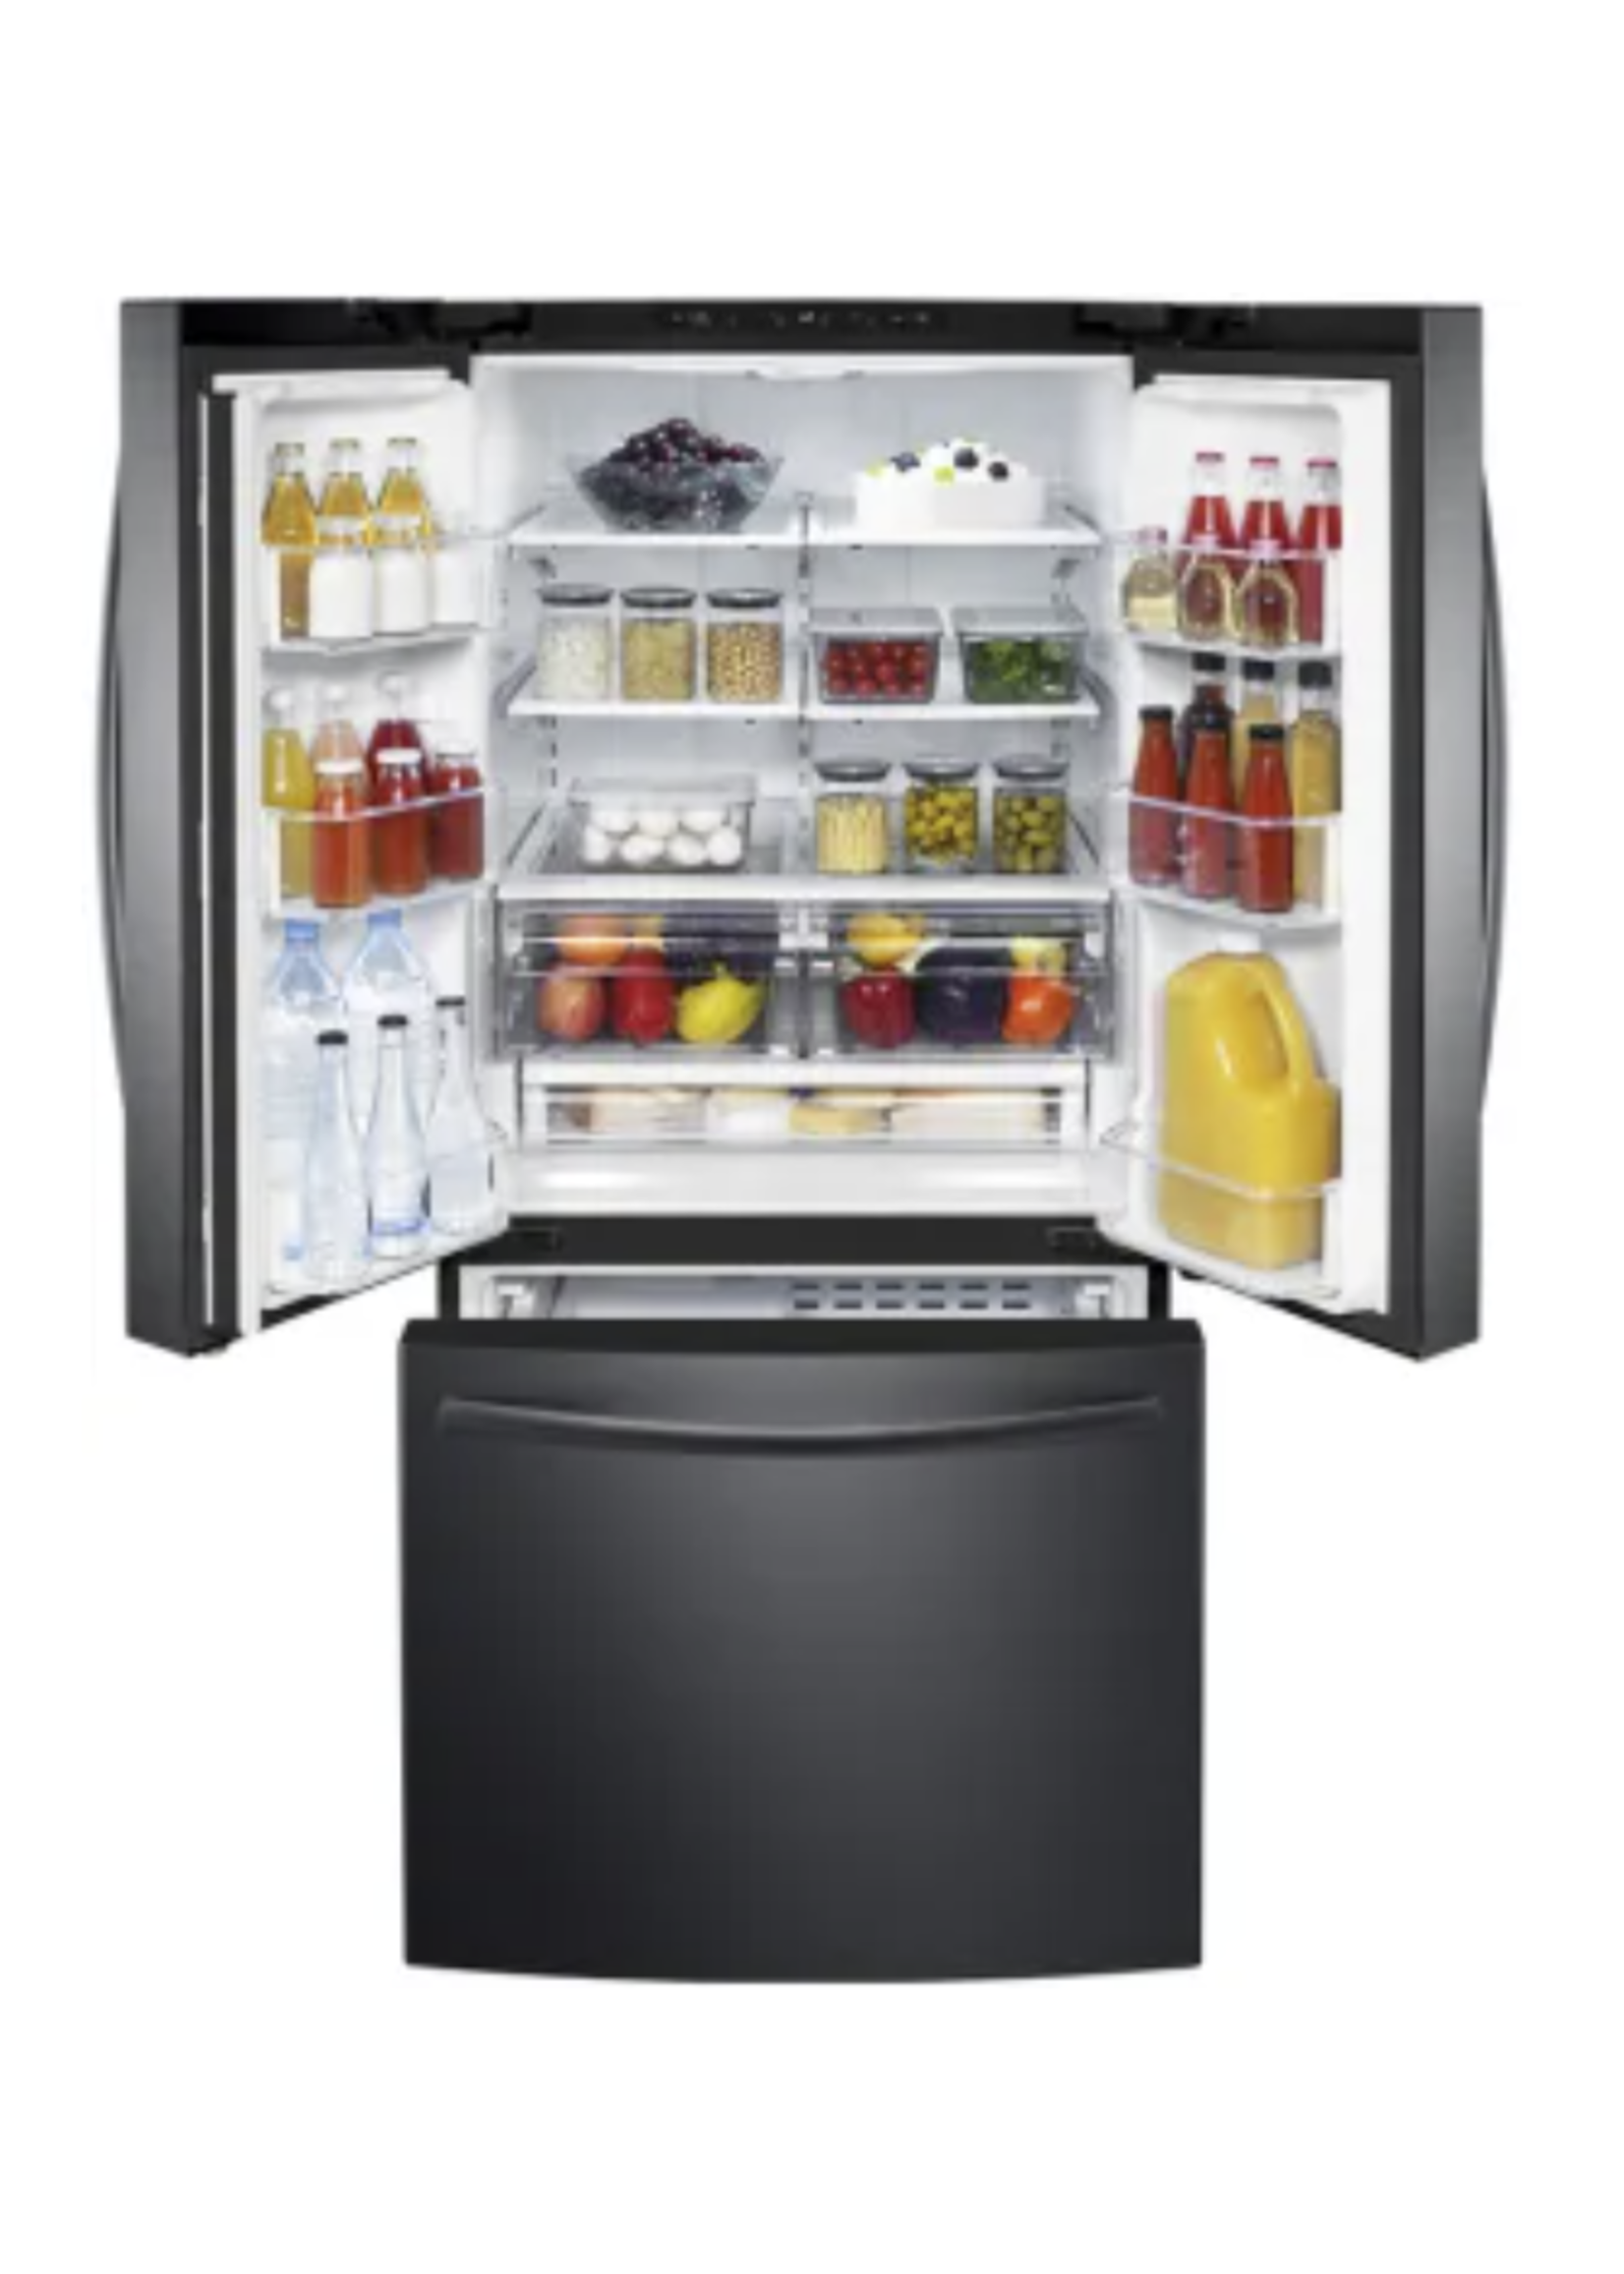 SAMSUNG SAMSUNG 30 Inch French Door Refrigerator with Ice Maker, LED Lighting, Energy Star Rated, 21.8 cu. ft. Capacity